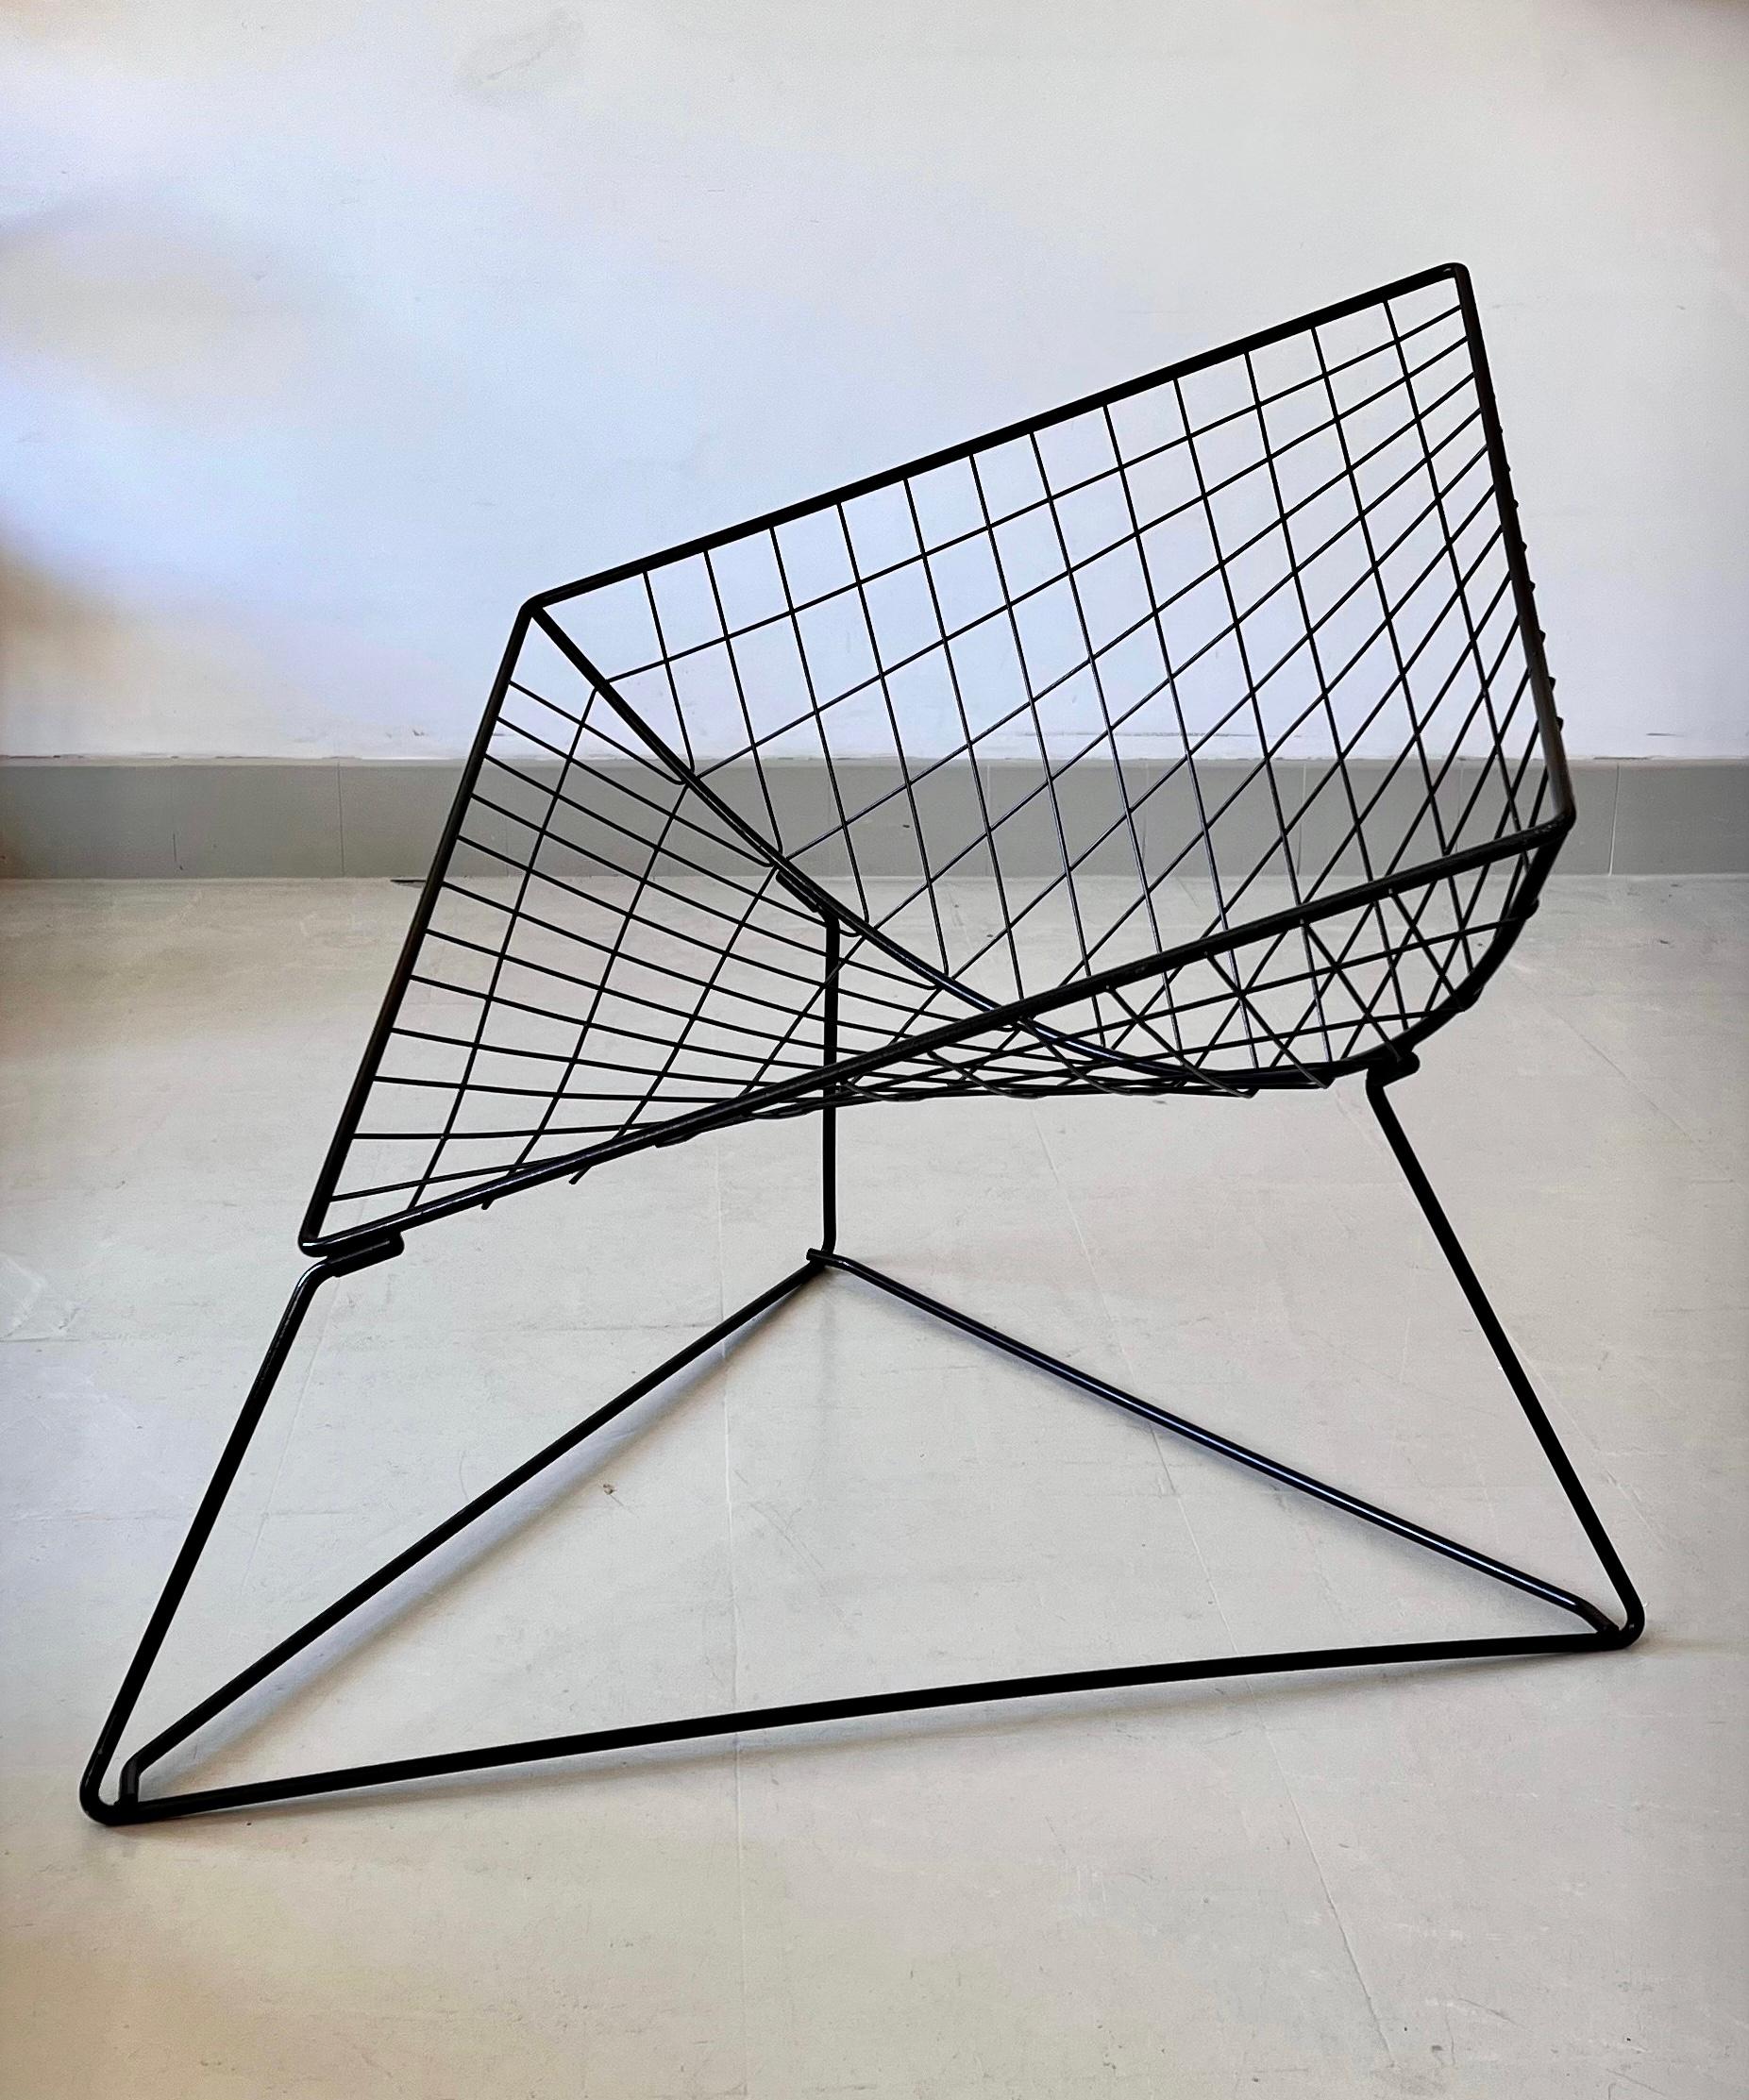 Tubular steel armchair created by the Danish designer Niels Gammelgaard for IKEA. 
An iconic piece, a real classic in Danish design. in very good condition. 
The lacquered metal structure forms a diamond placed on a triangular. The perspective